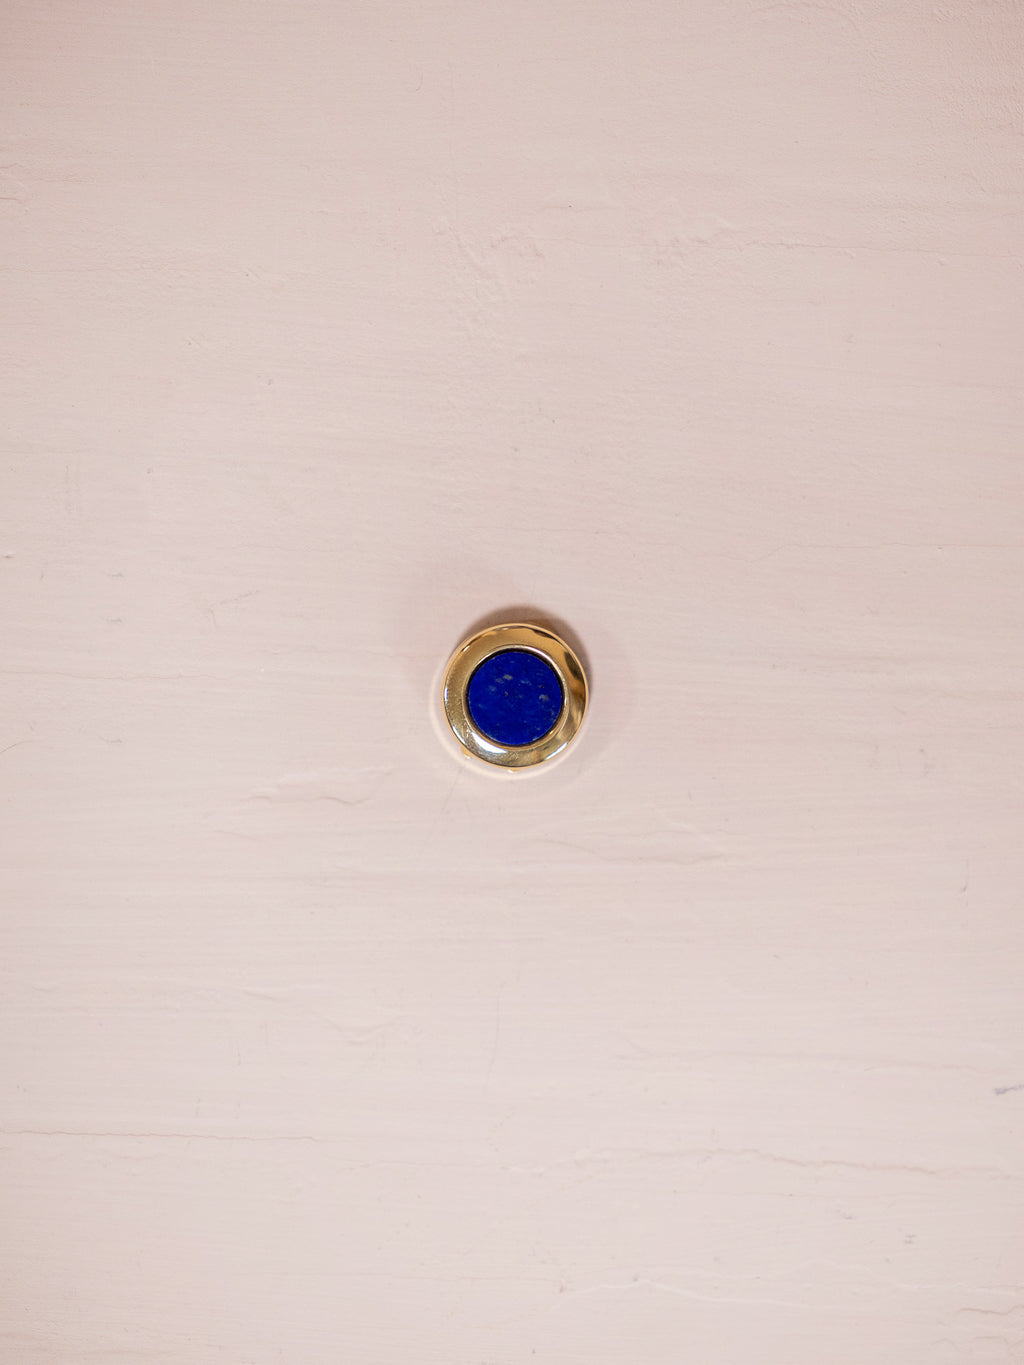 Lapus lazuli and gold button cover on pink background.